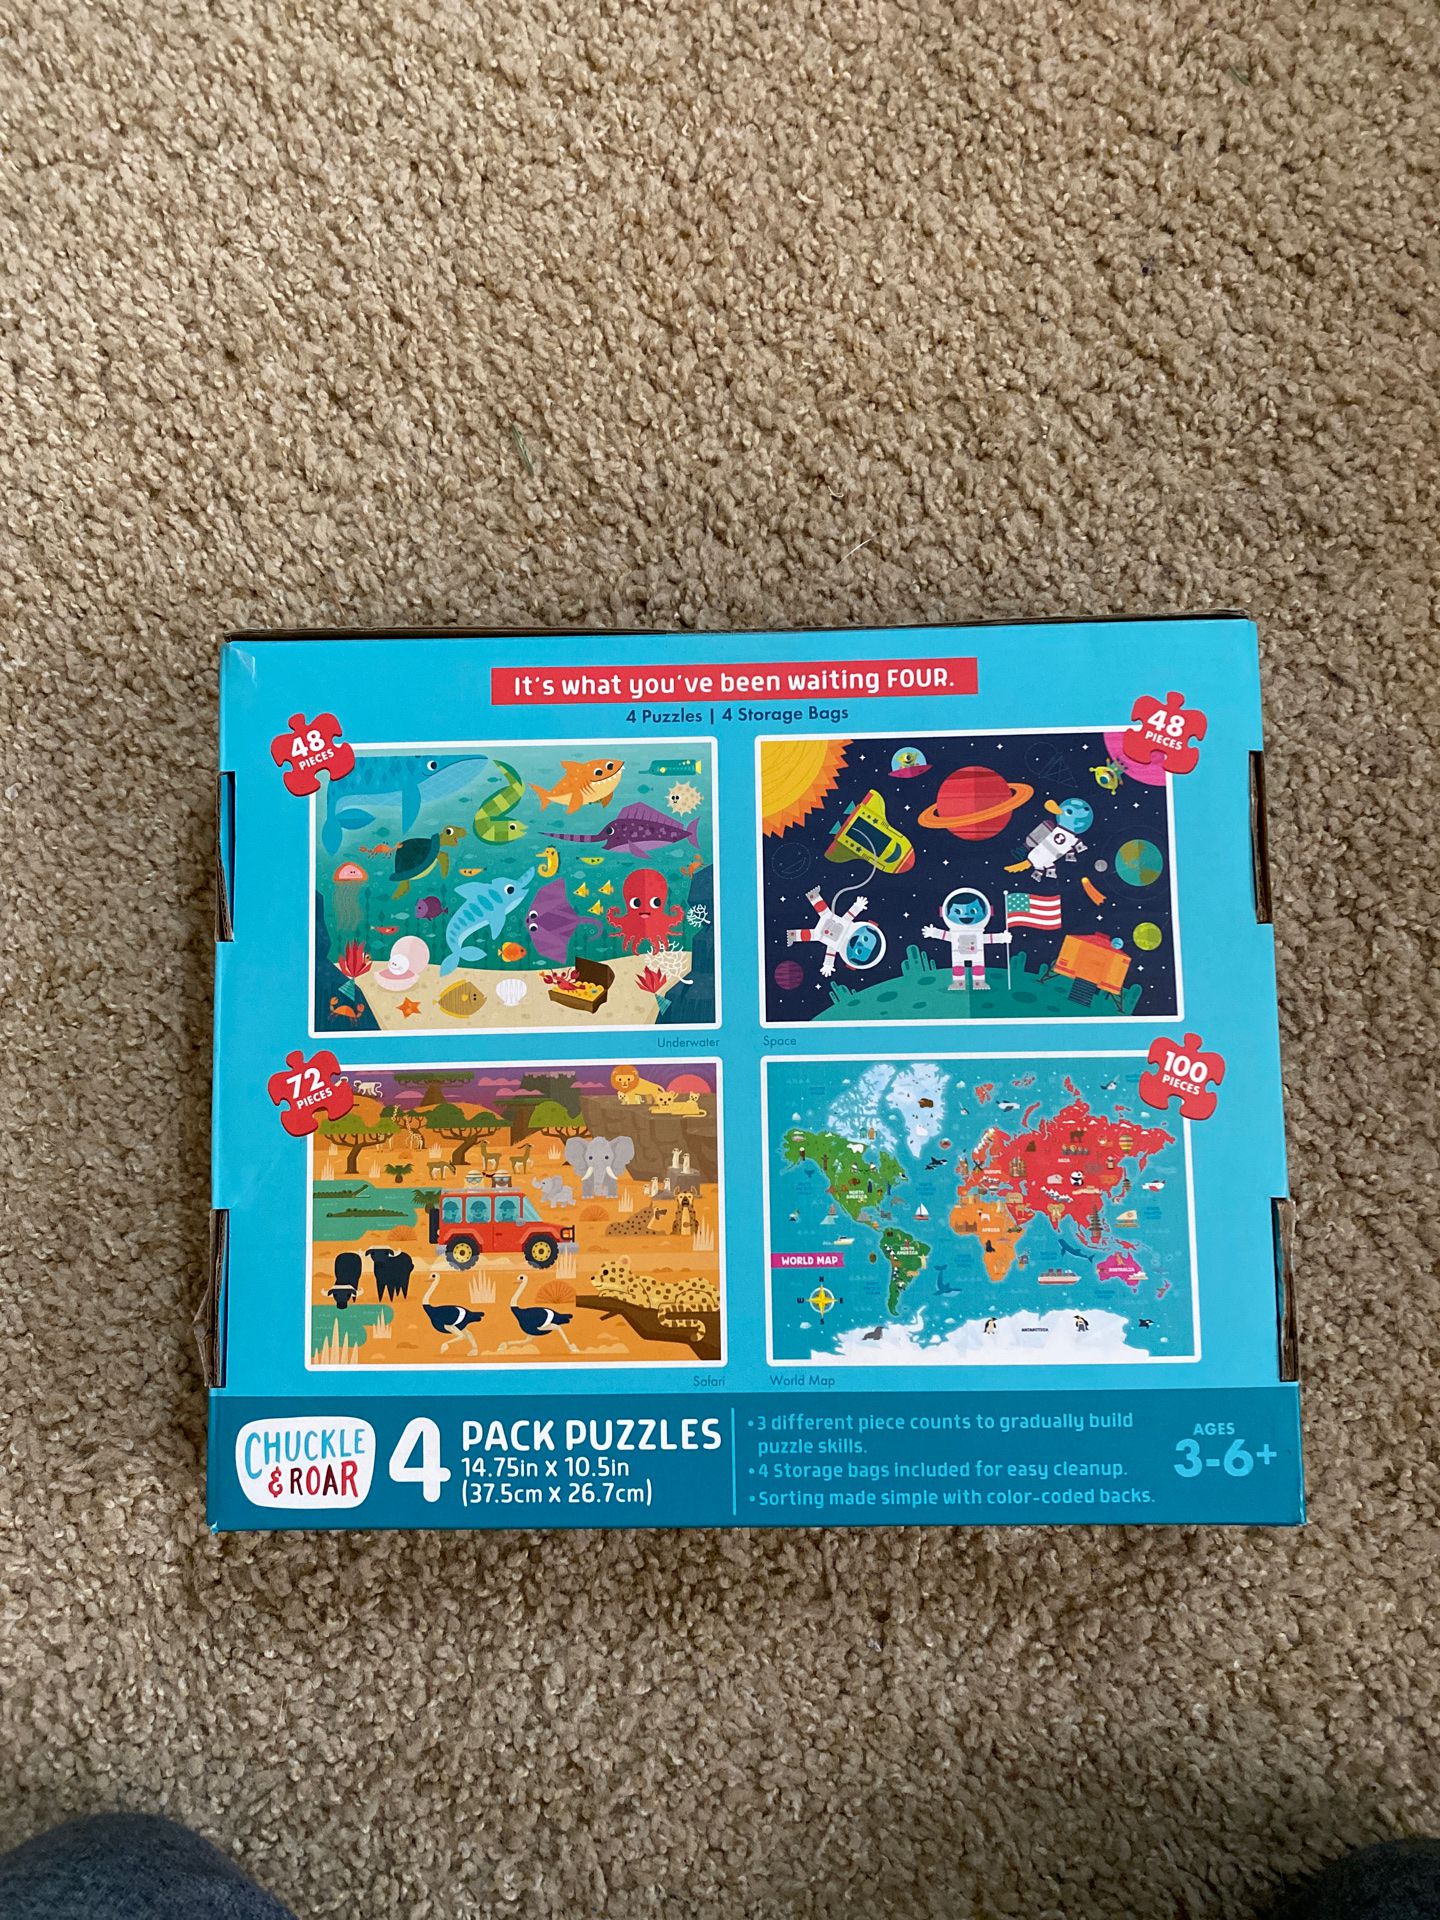 Buffalo Games Chuckle & Roar 4 pack puzzles